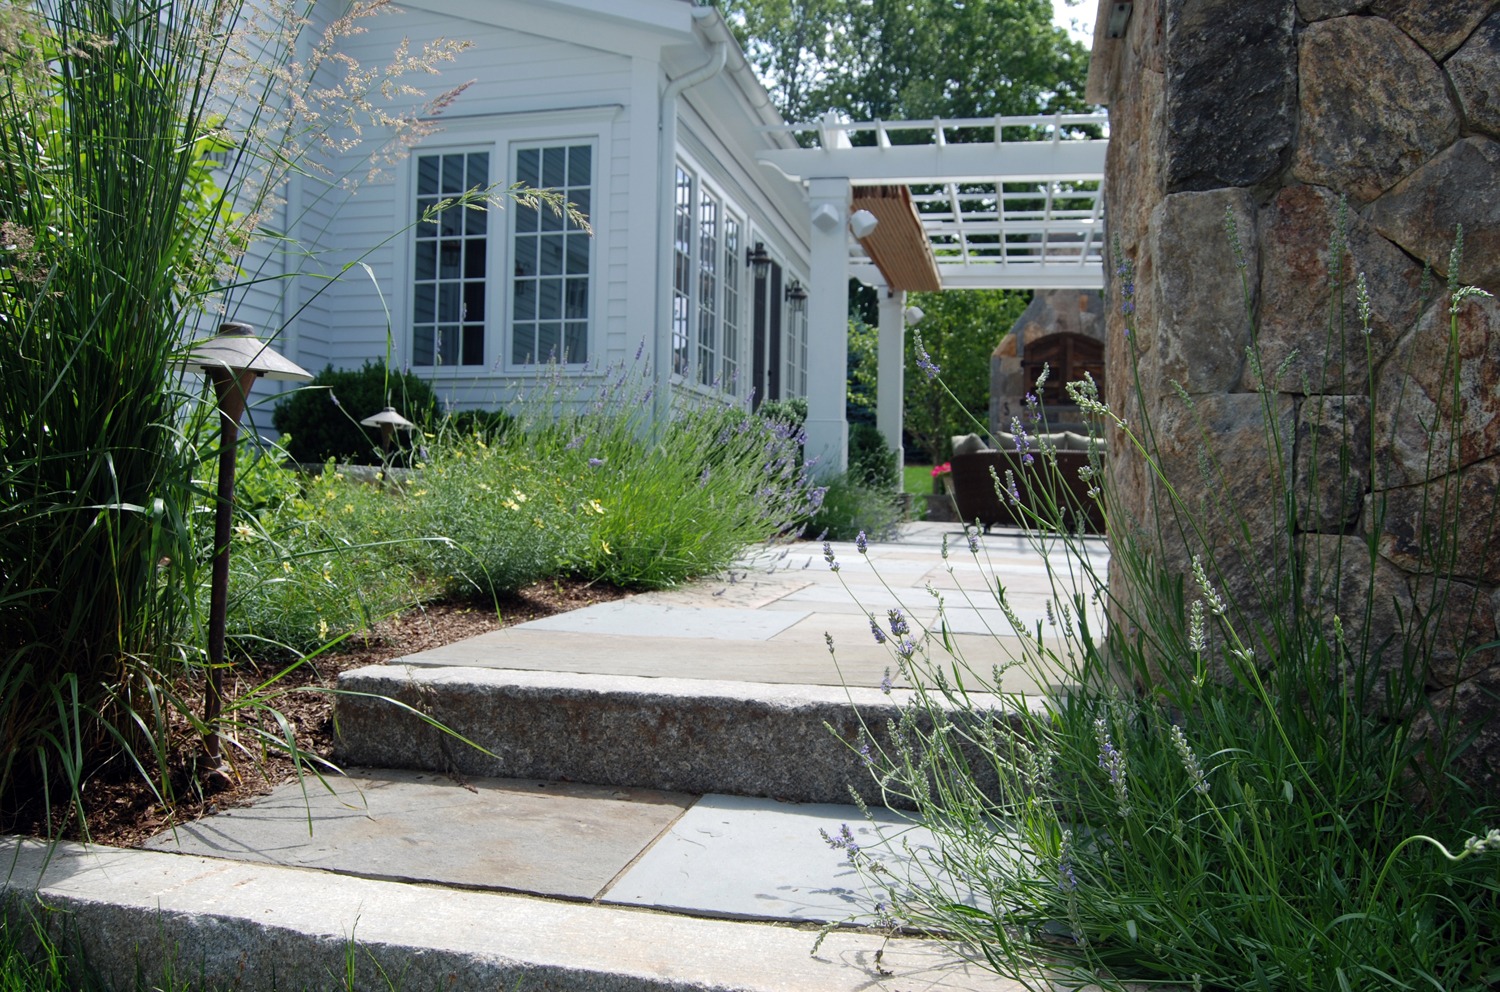 A stone pathway leads through a garden towards a white house with a pergola. Lavender and grasses border the path, with a sunny blue sky above.